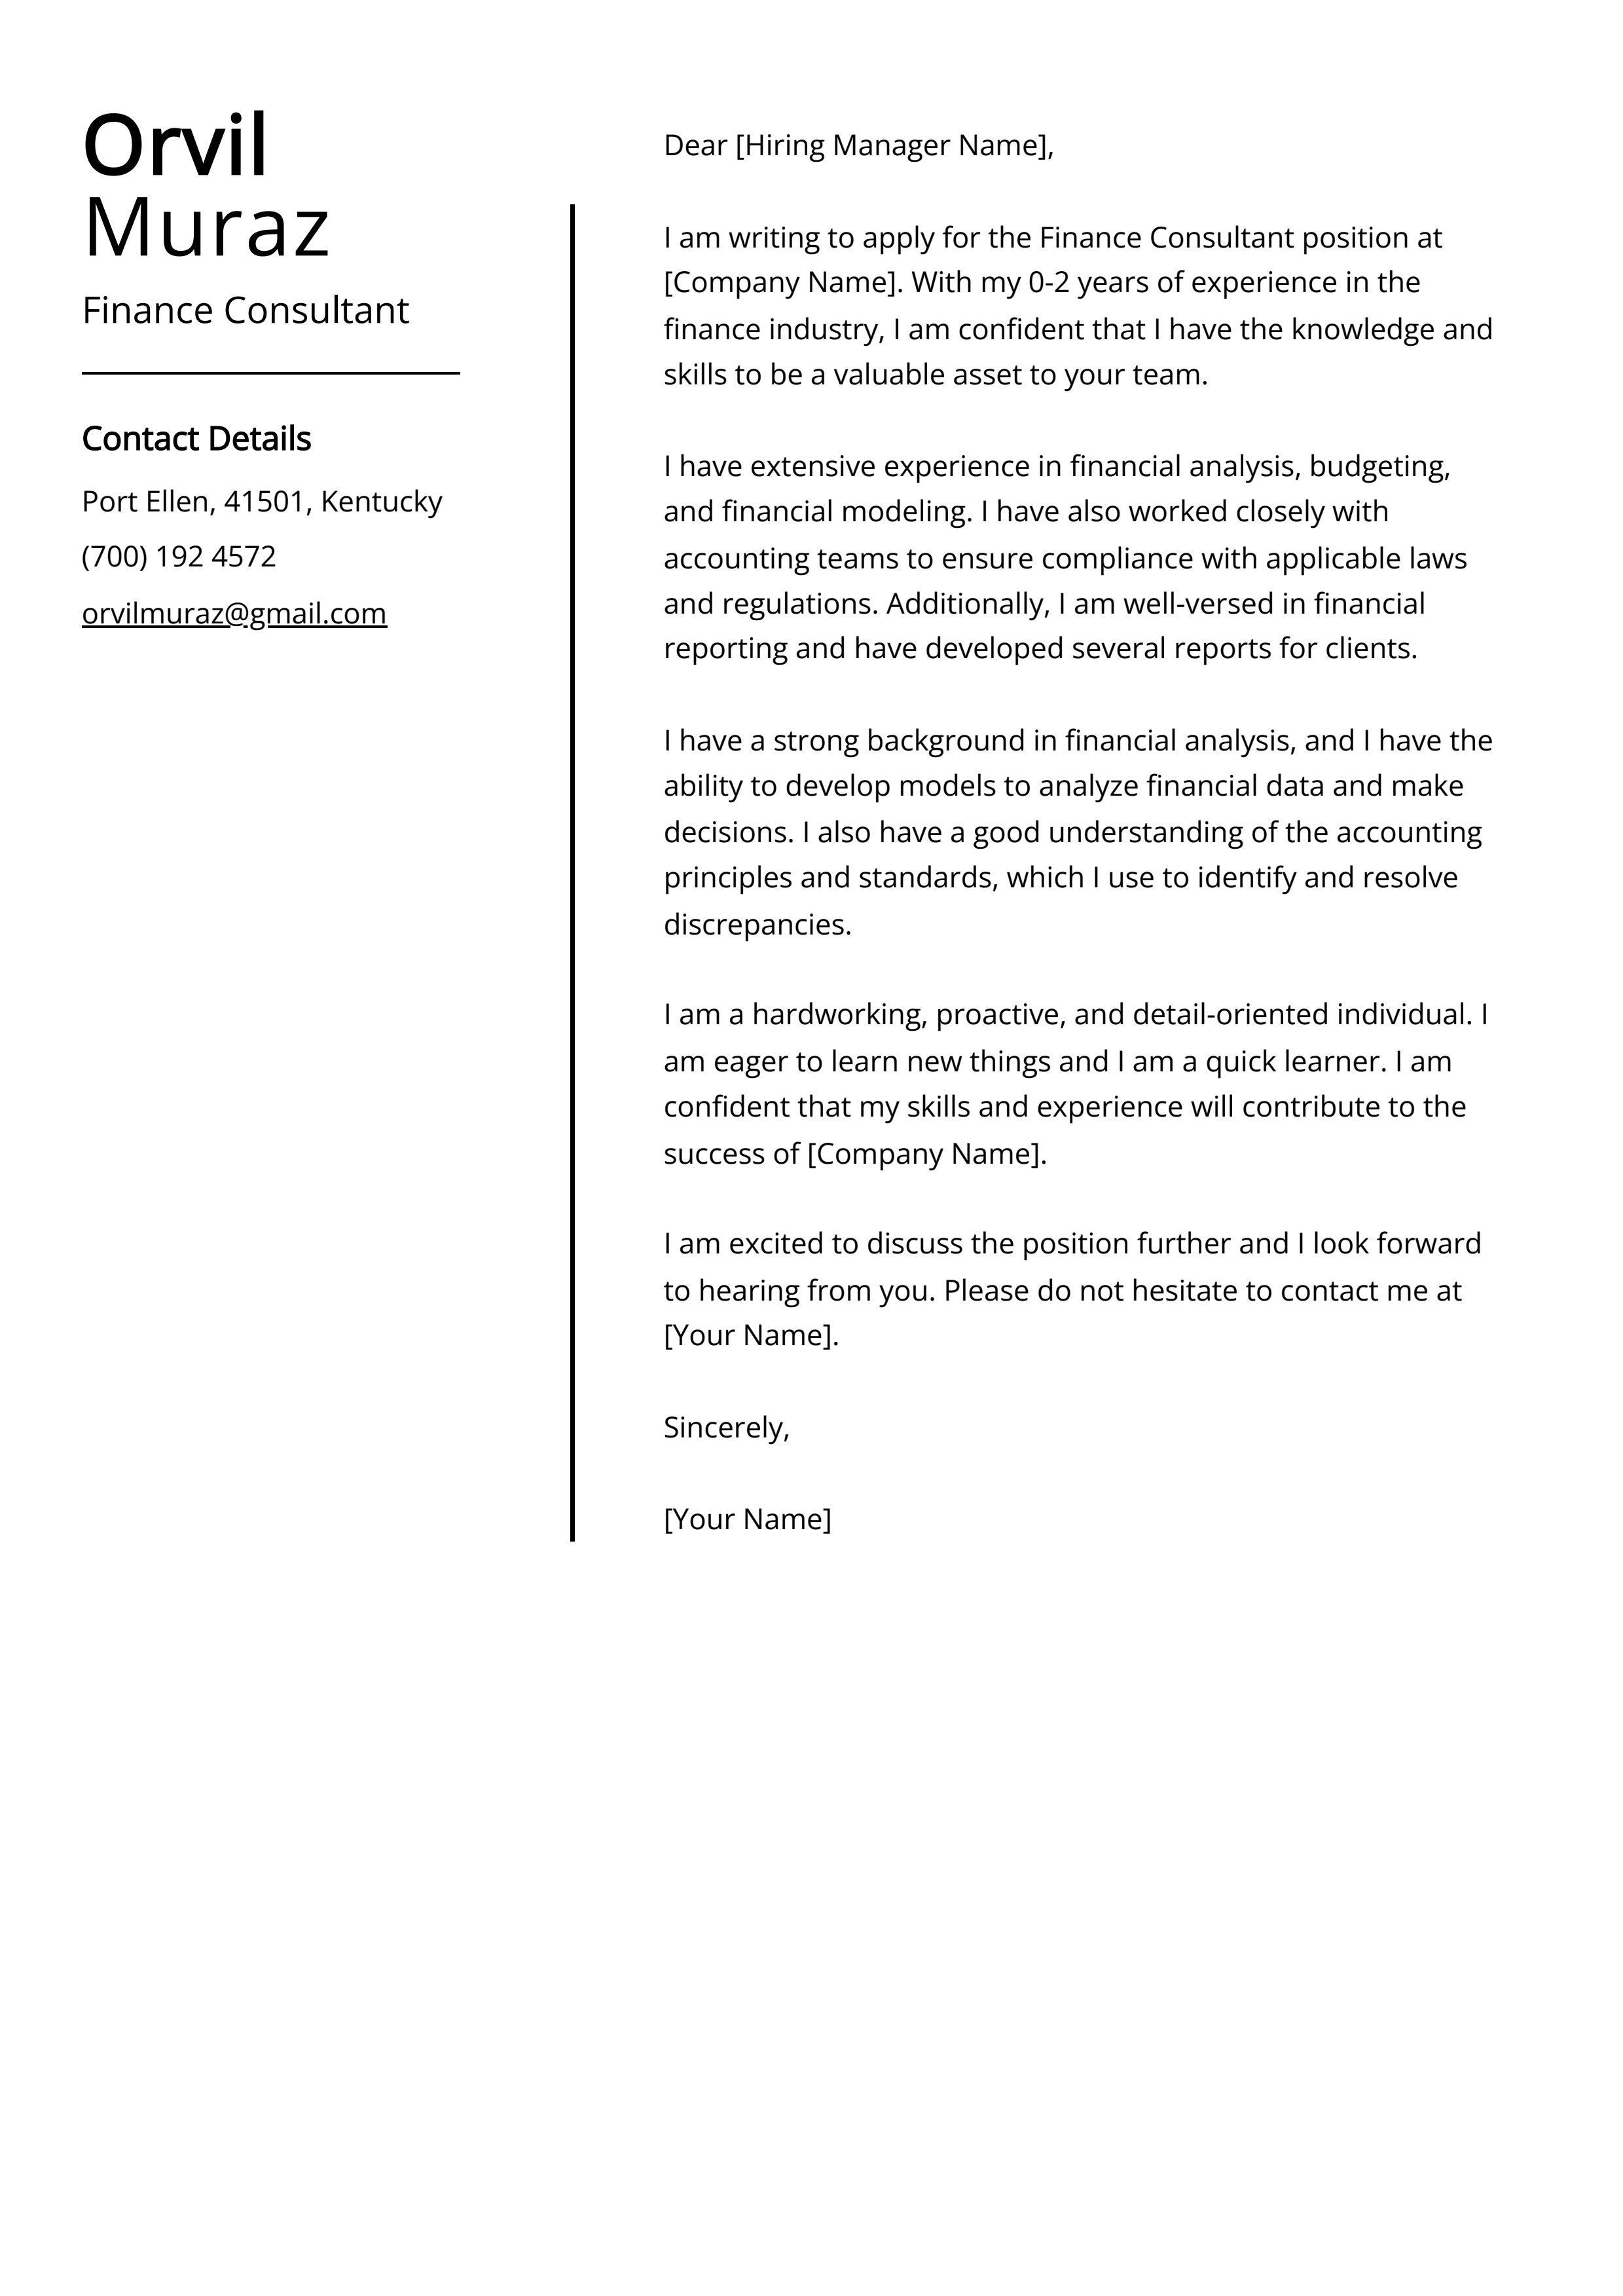 Finance Consultant Cover Letter Example